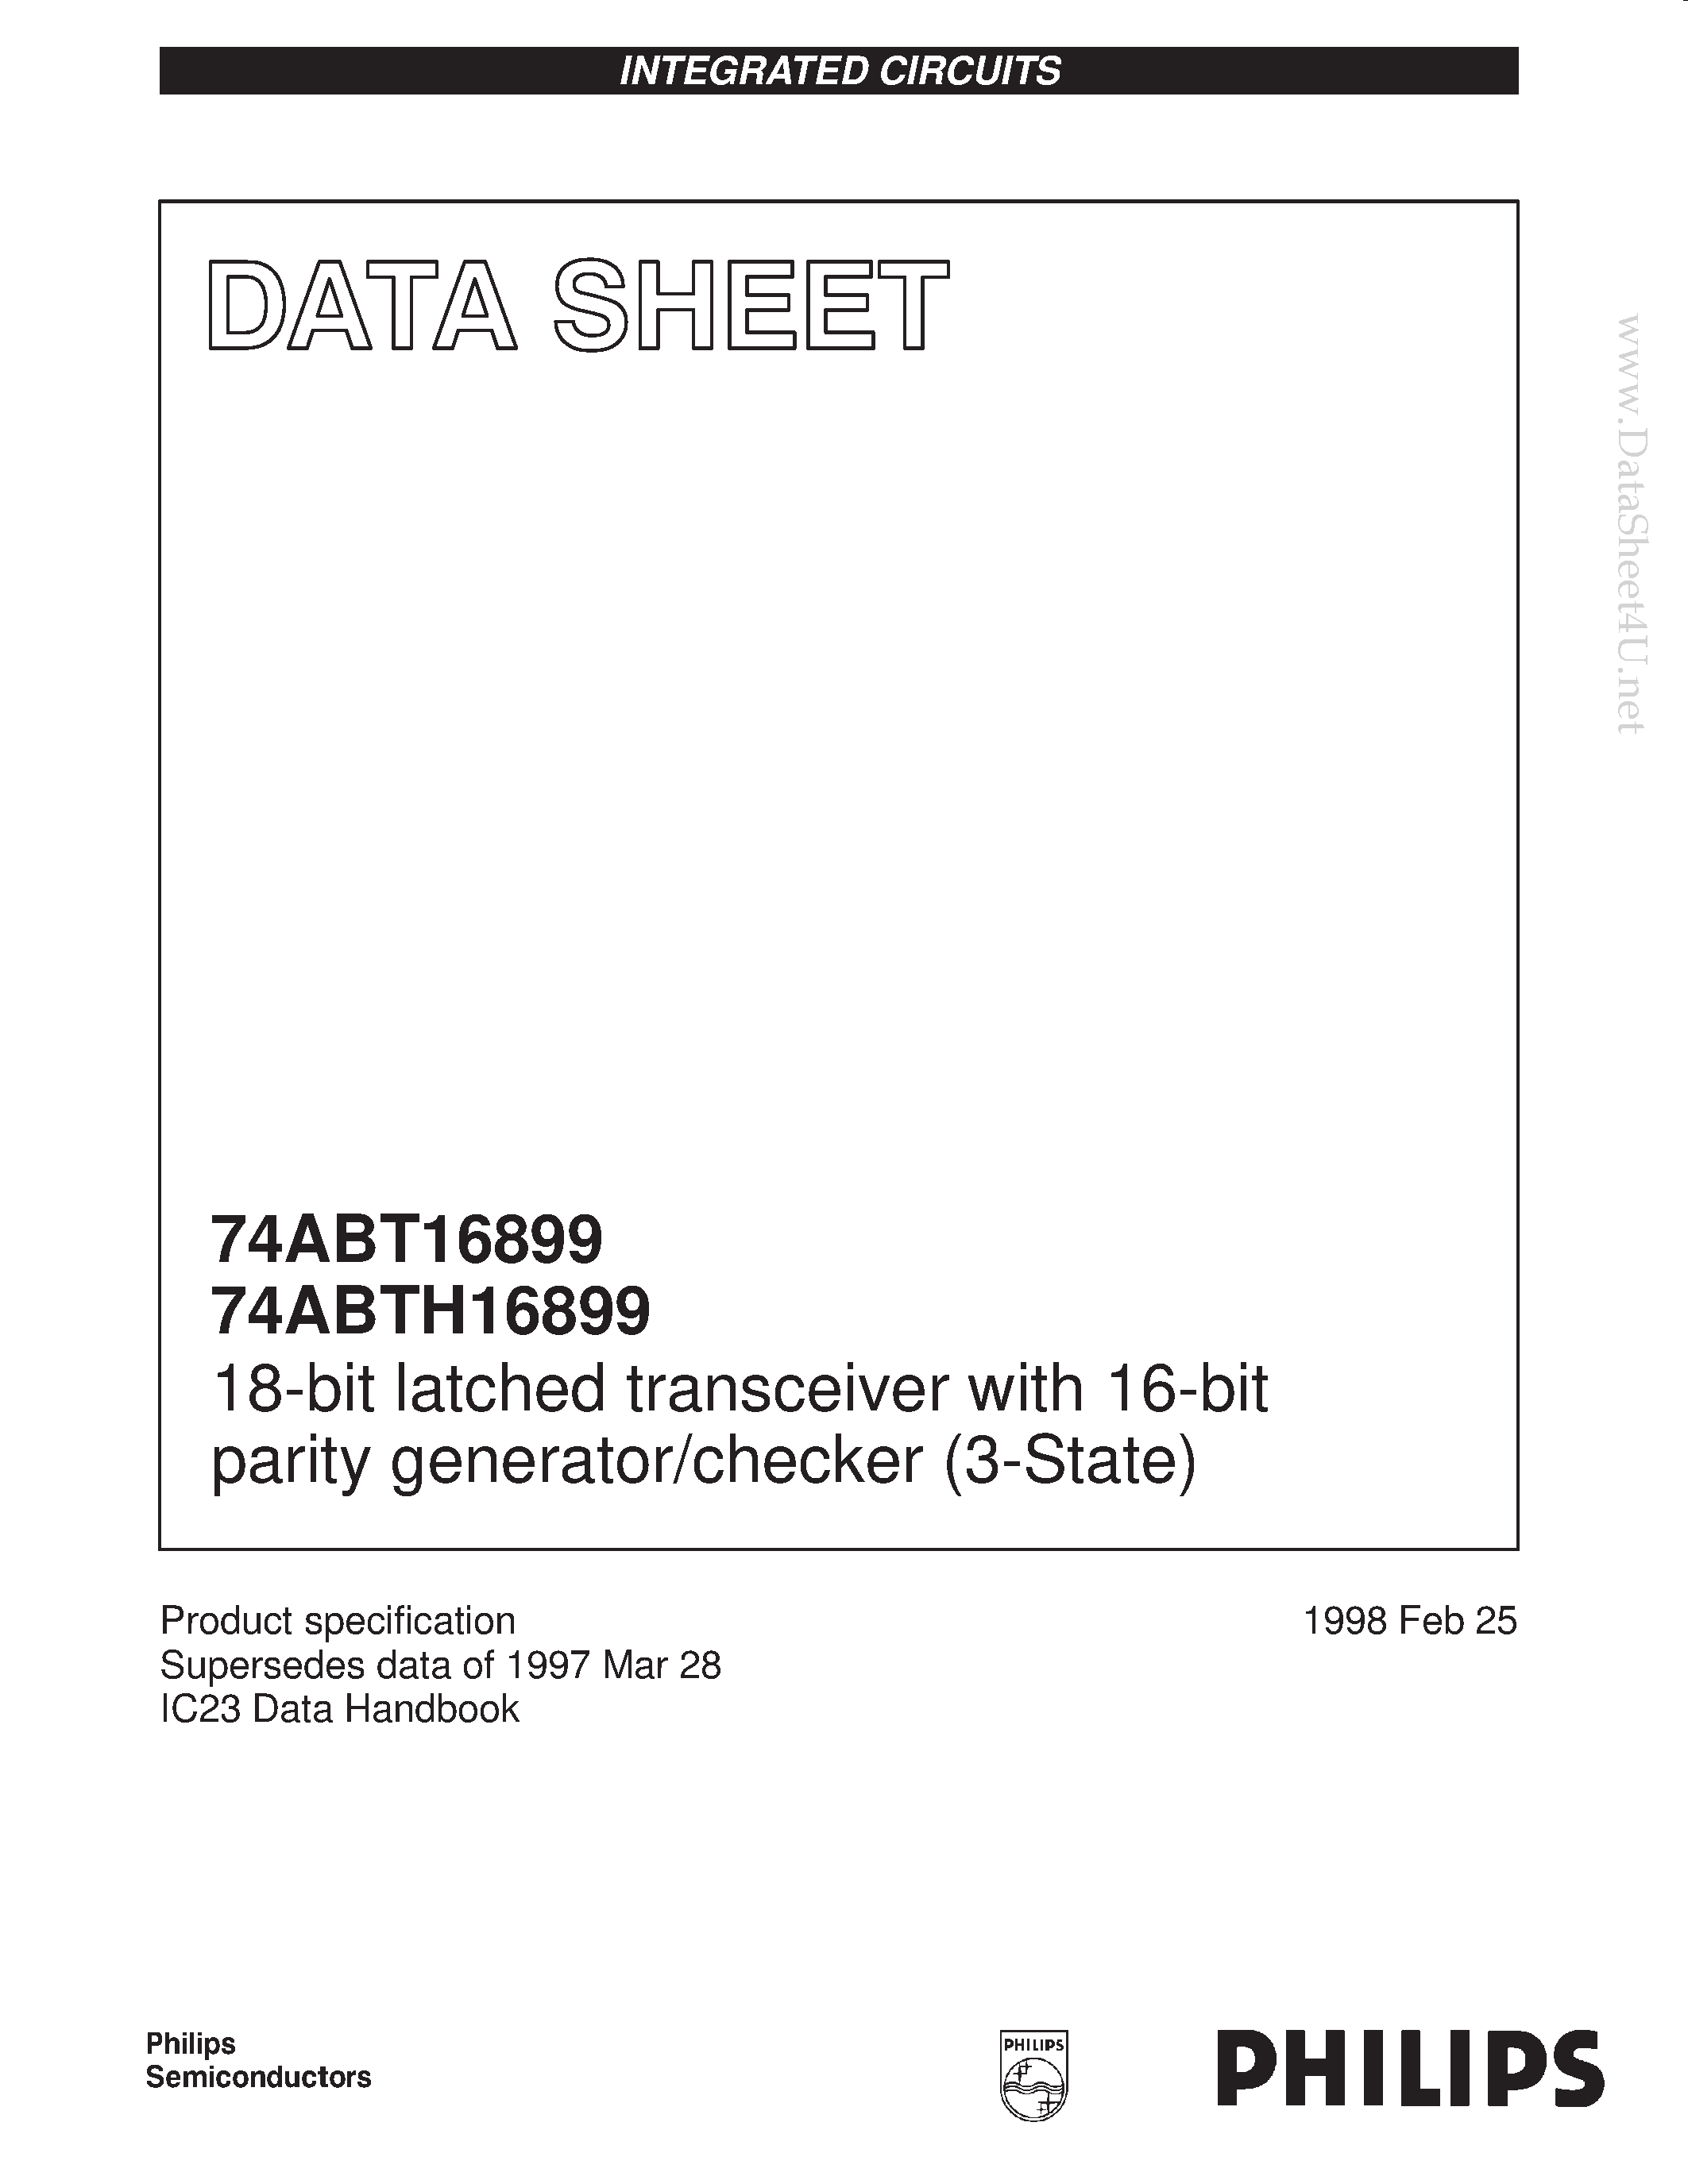 Datasheet 74ABTH16899DL - 18-bit latched transceiver with 16-bit parity generator/checker 3-State page 1